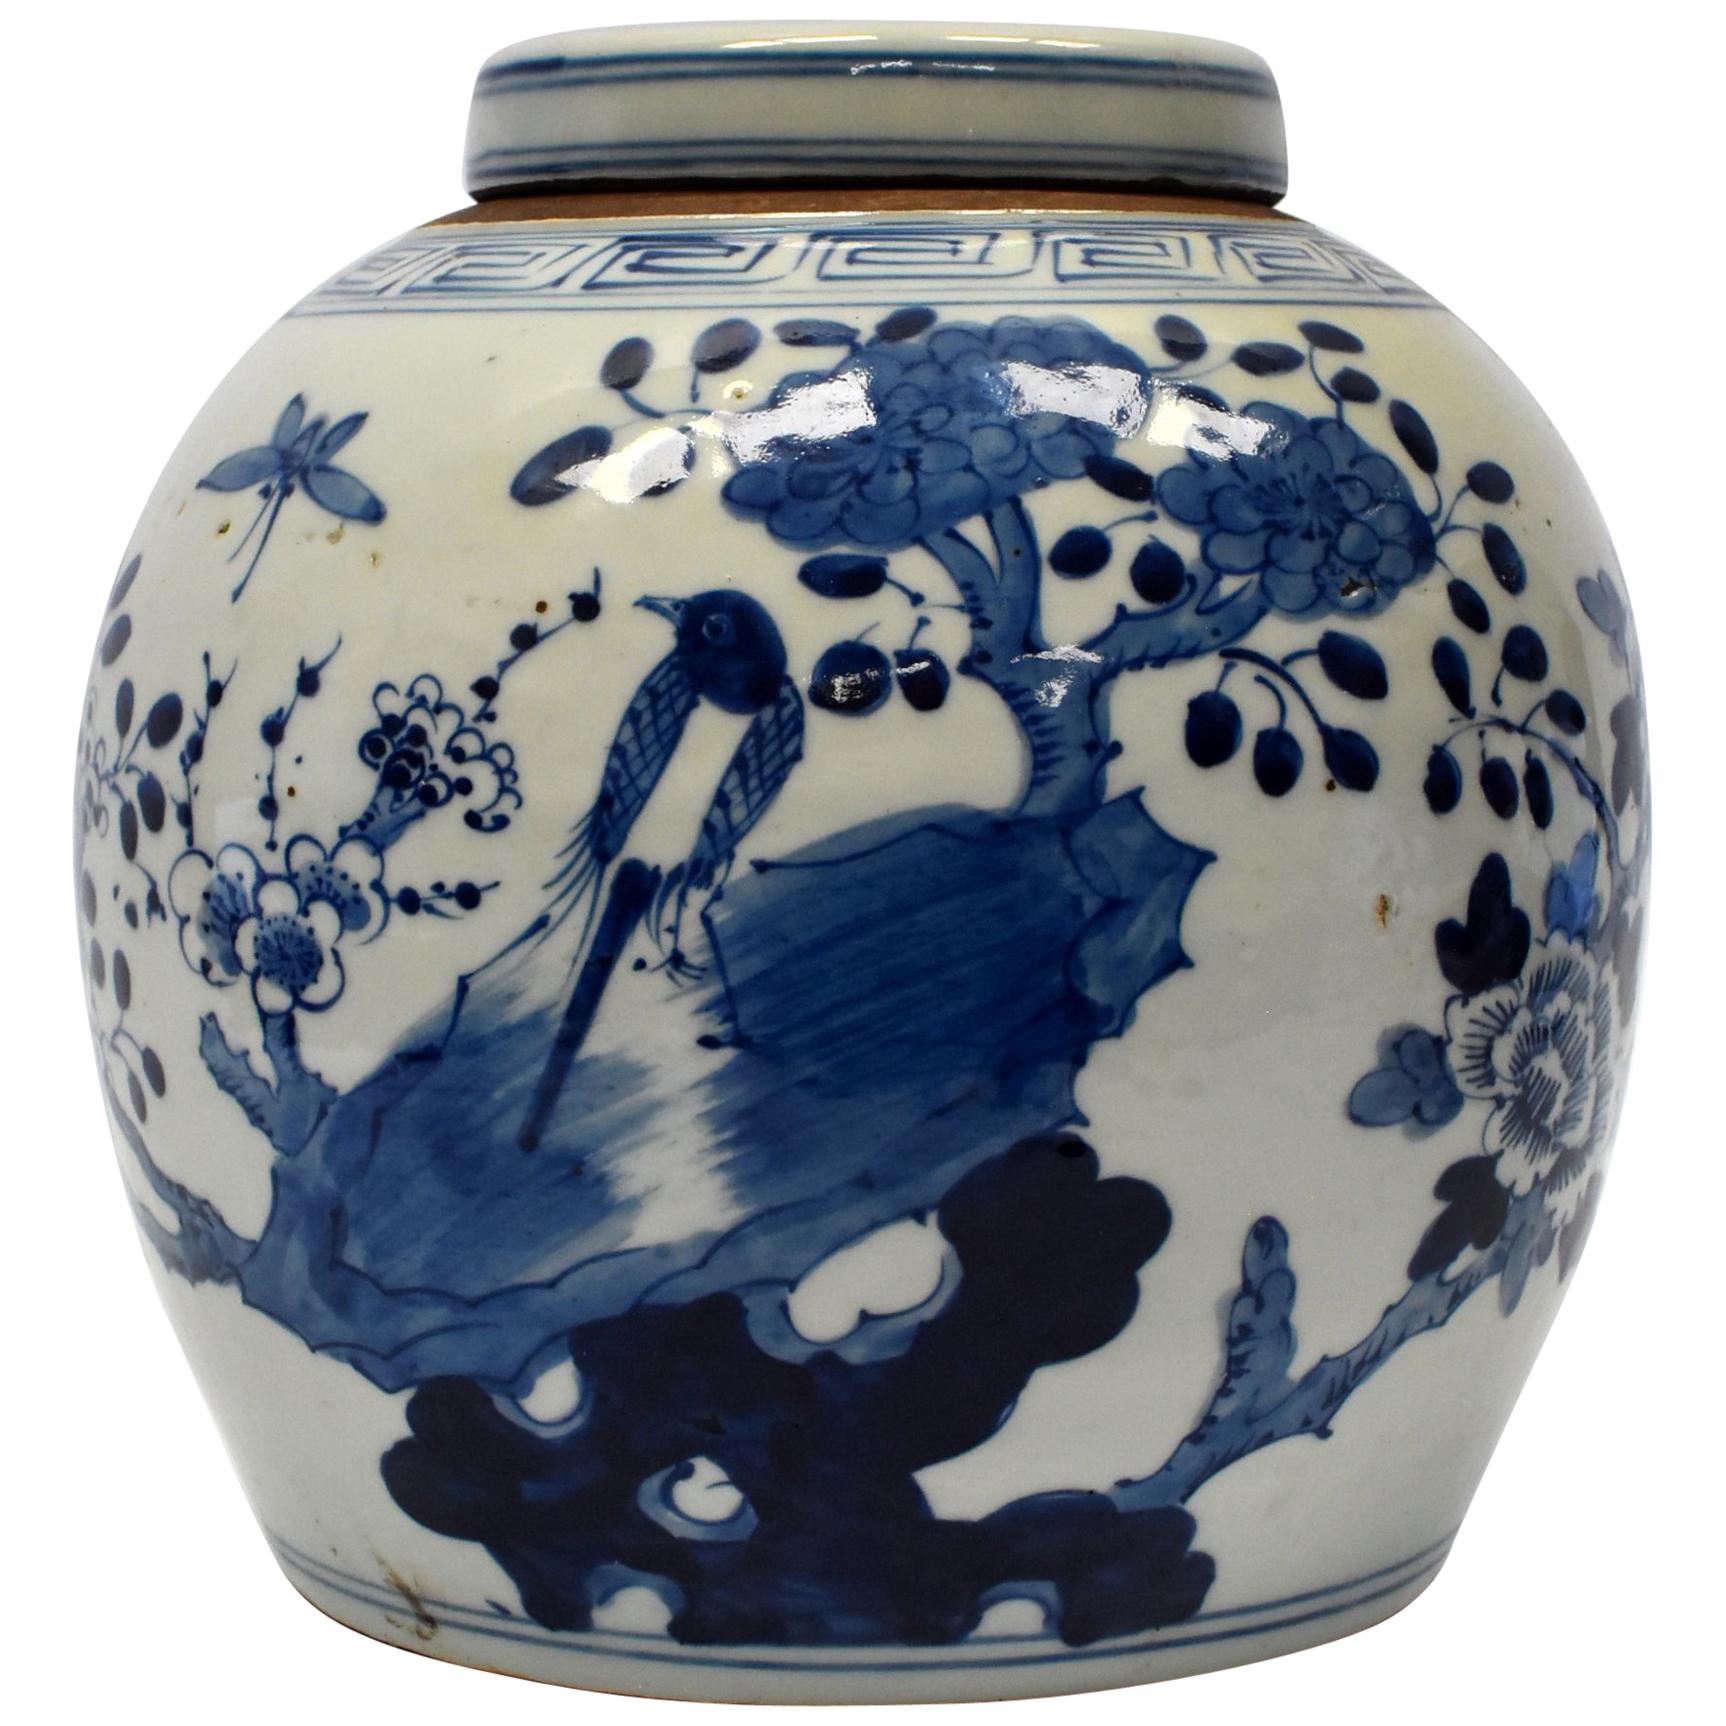 Blue and White Chinese Porcelain Jar, Magpie and Butterfly